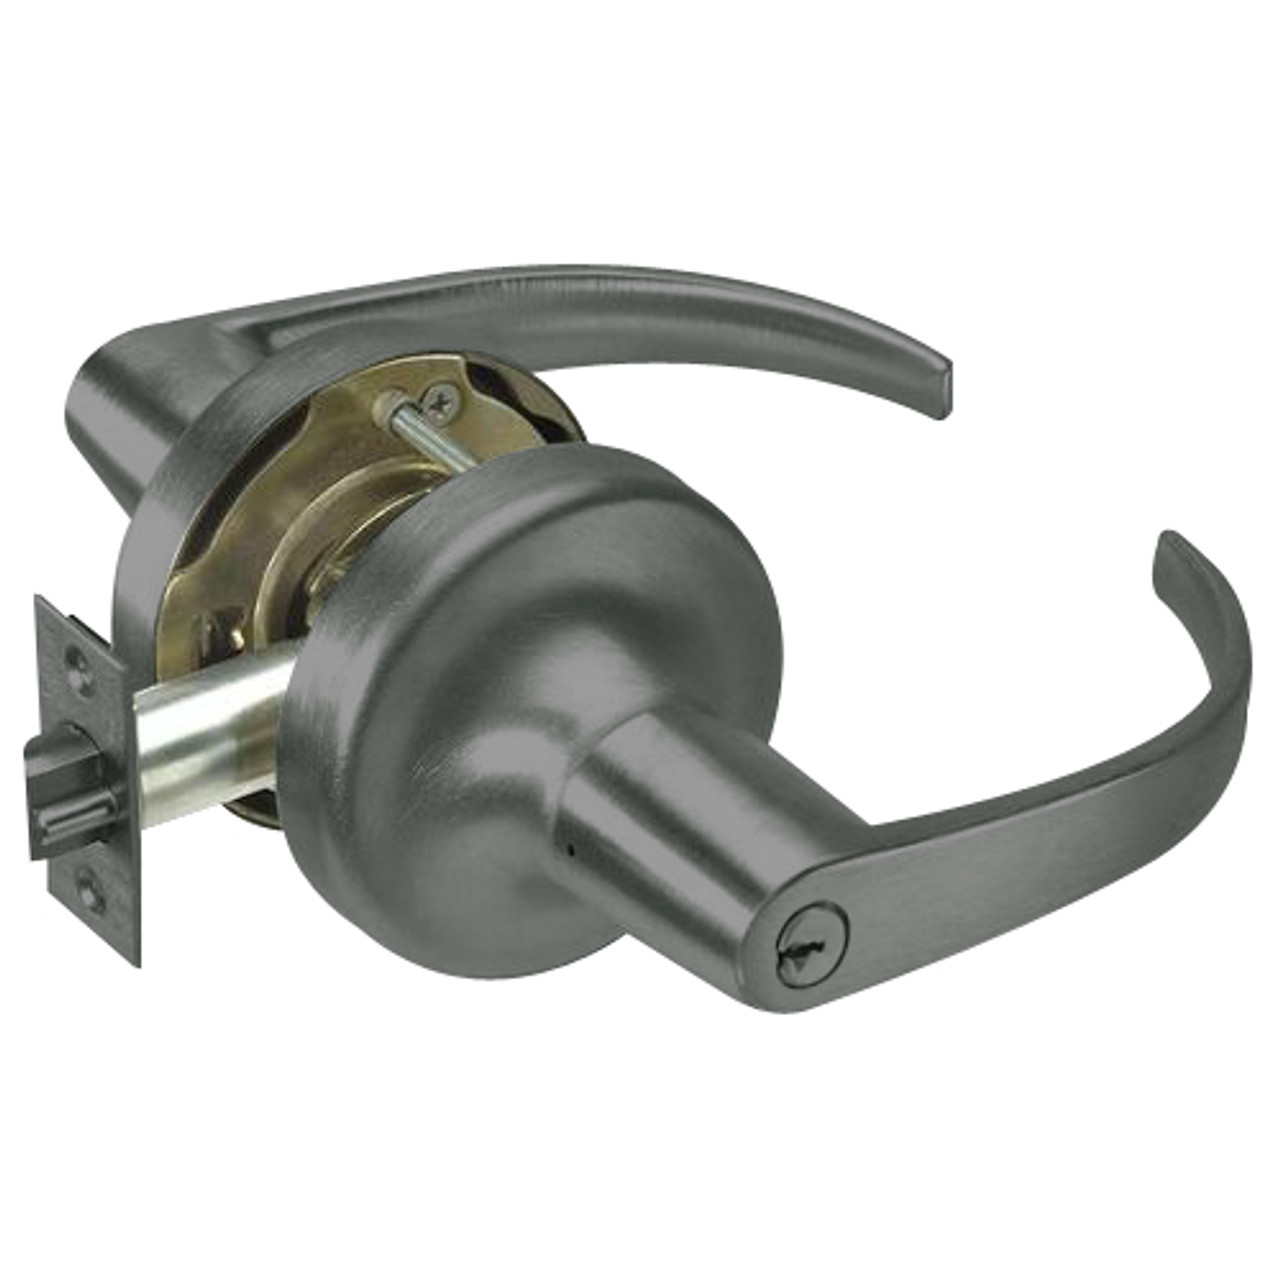 PB5330LN-620 Yale 5300LN Series Double Cylinder Utility or Institutional Cylindrical Lock with Pacific Beach Lever in Antique Nickel